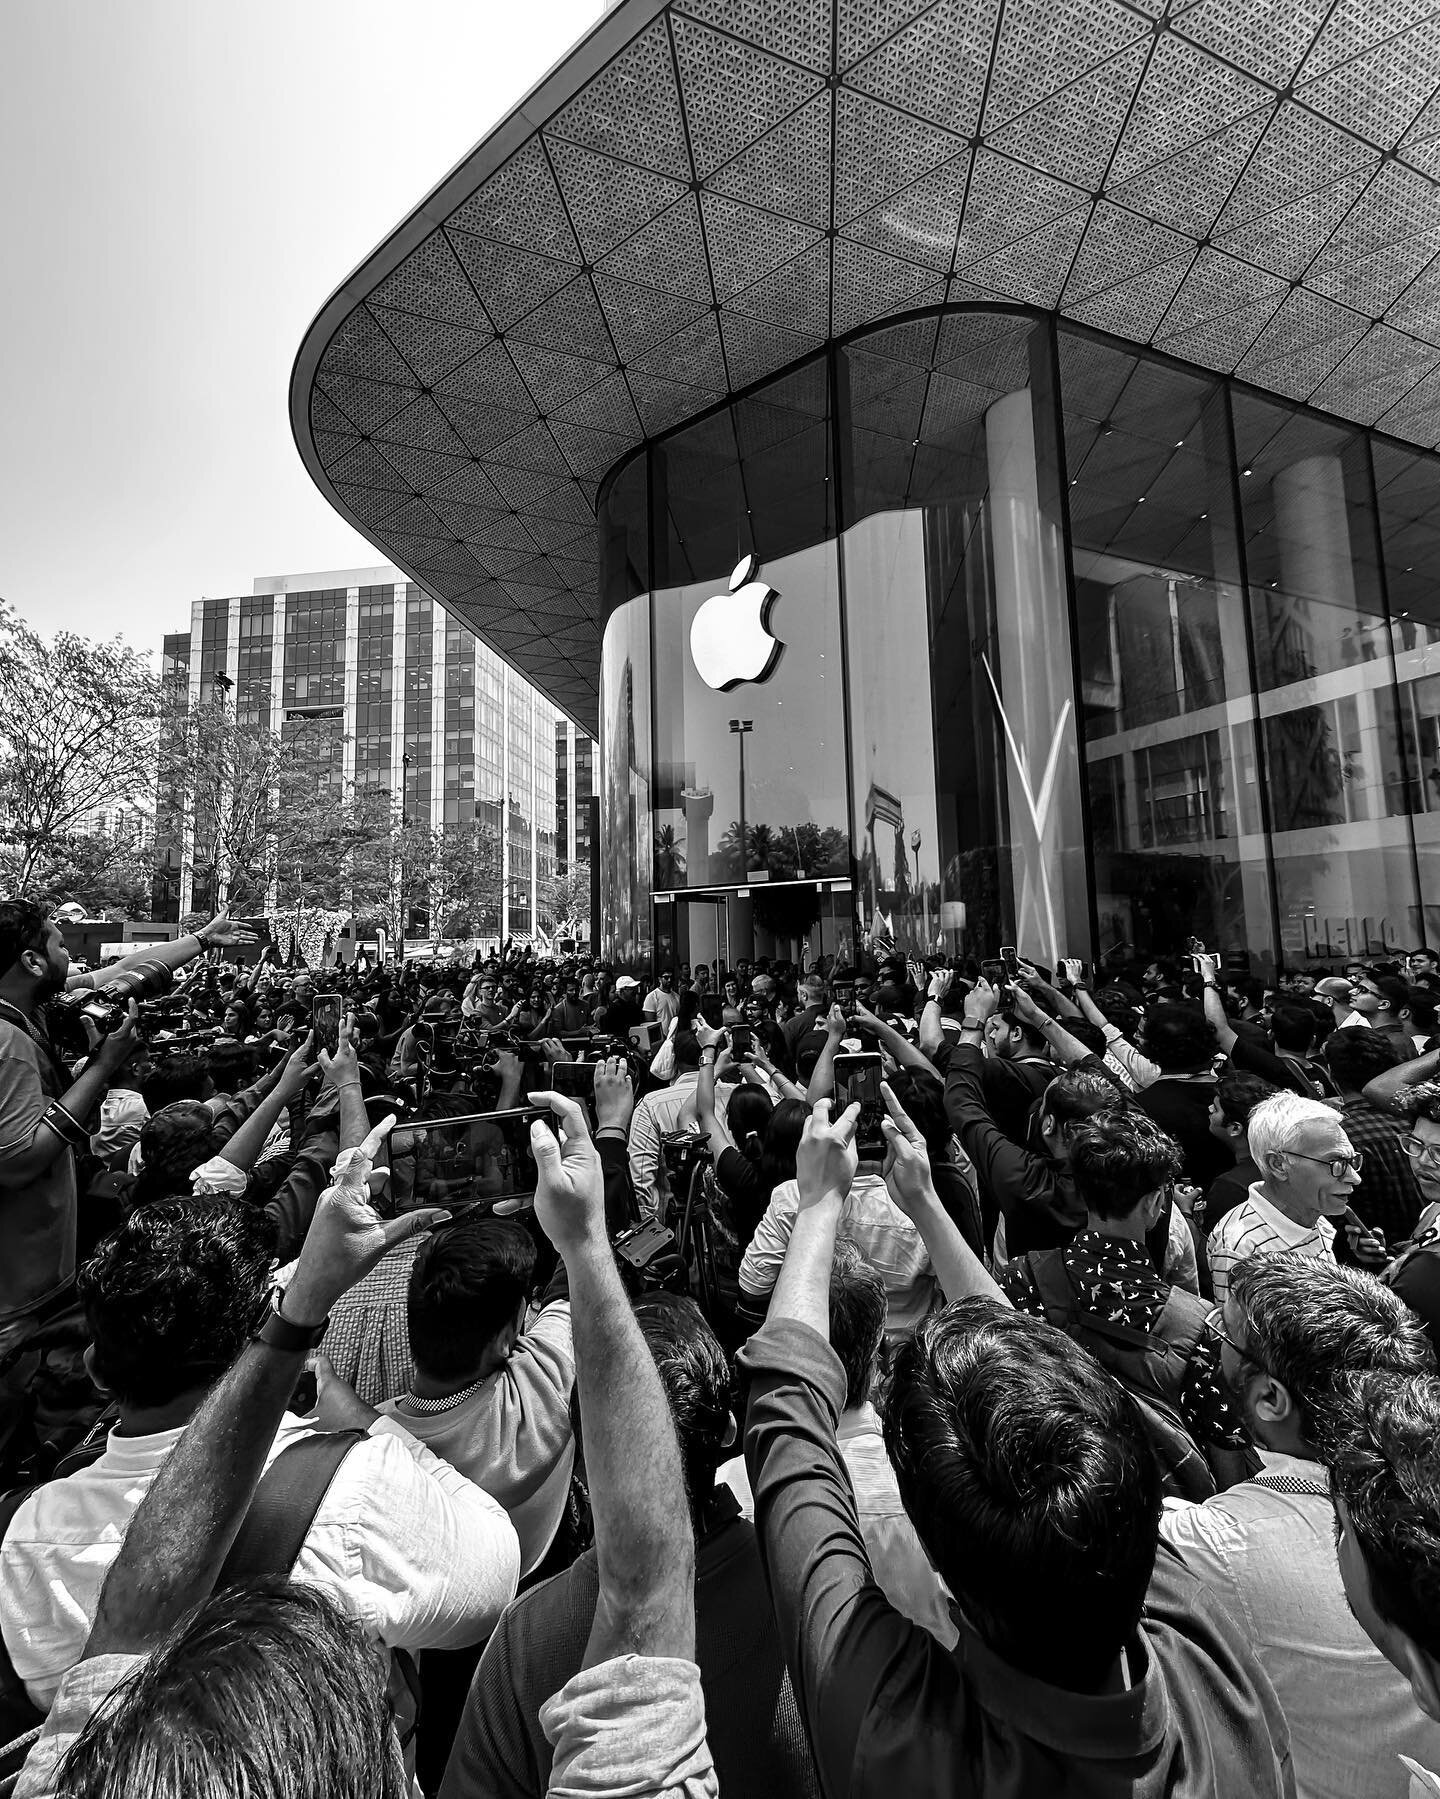 Apple launches India&rsquo;s first Apple Store at BKC, in #mumbai. Here&rsquo;s my take on it, #shotoniphone 

See, in the end, we are artists. So what interests me is the art we can make in any space. If you like any of these, tell me about it in th